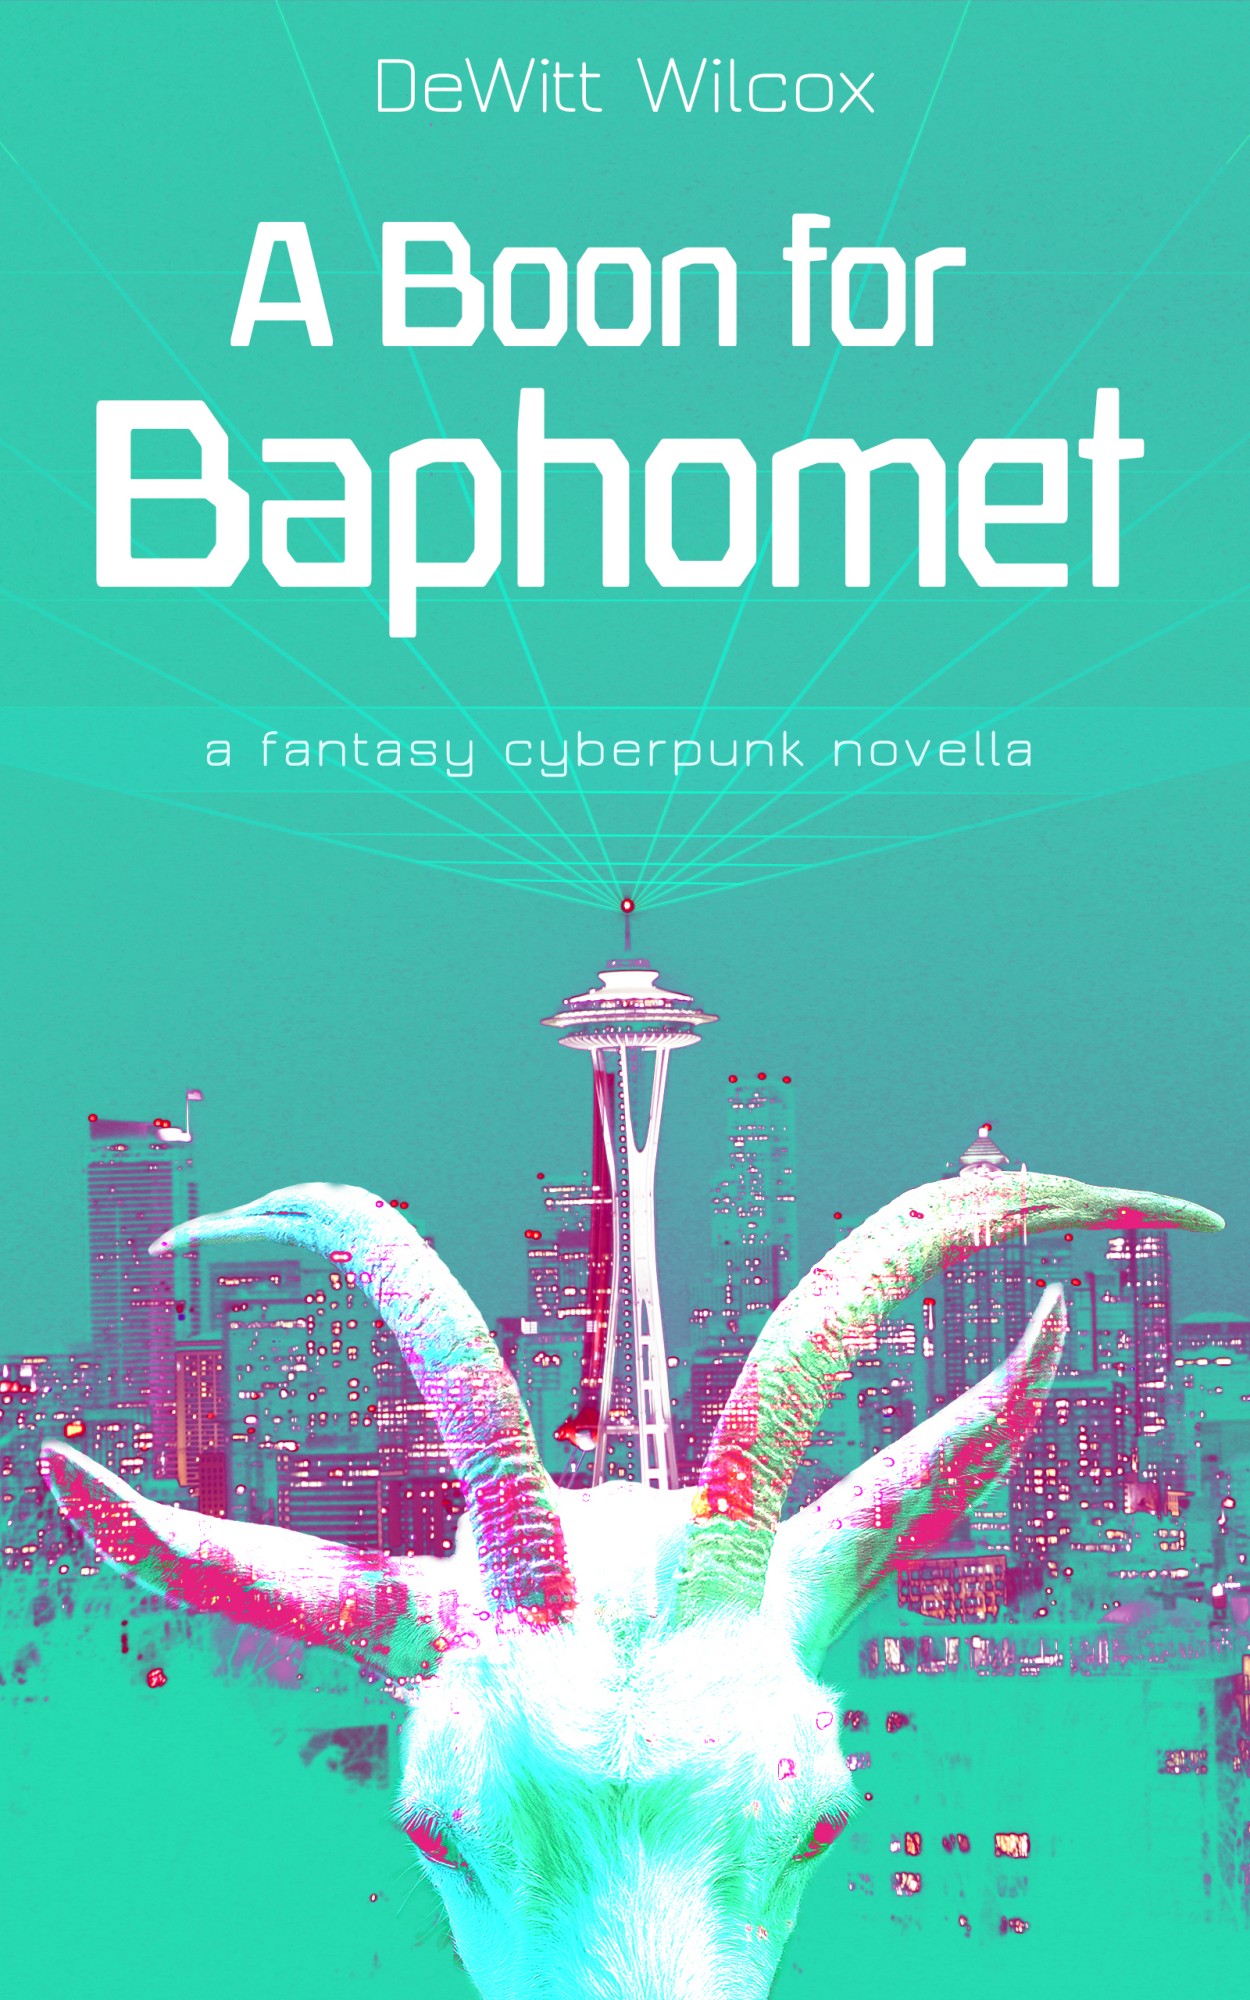 Cover image, with the Seattle cityscape and a goats head with a cyberpunk matrix grid above it